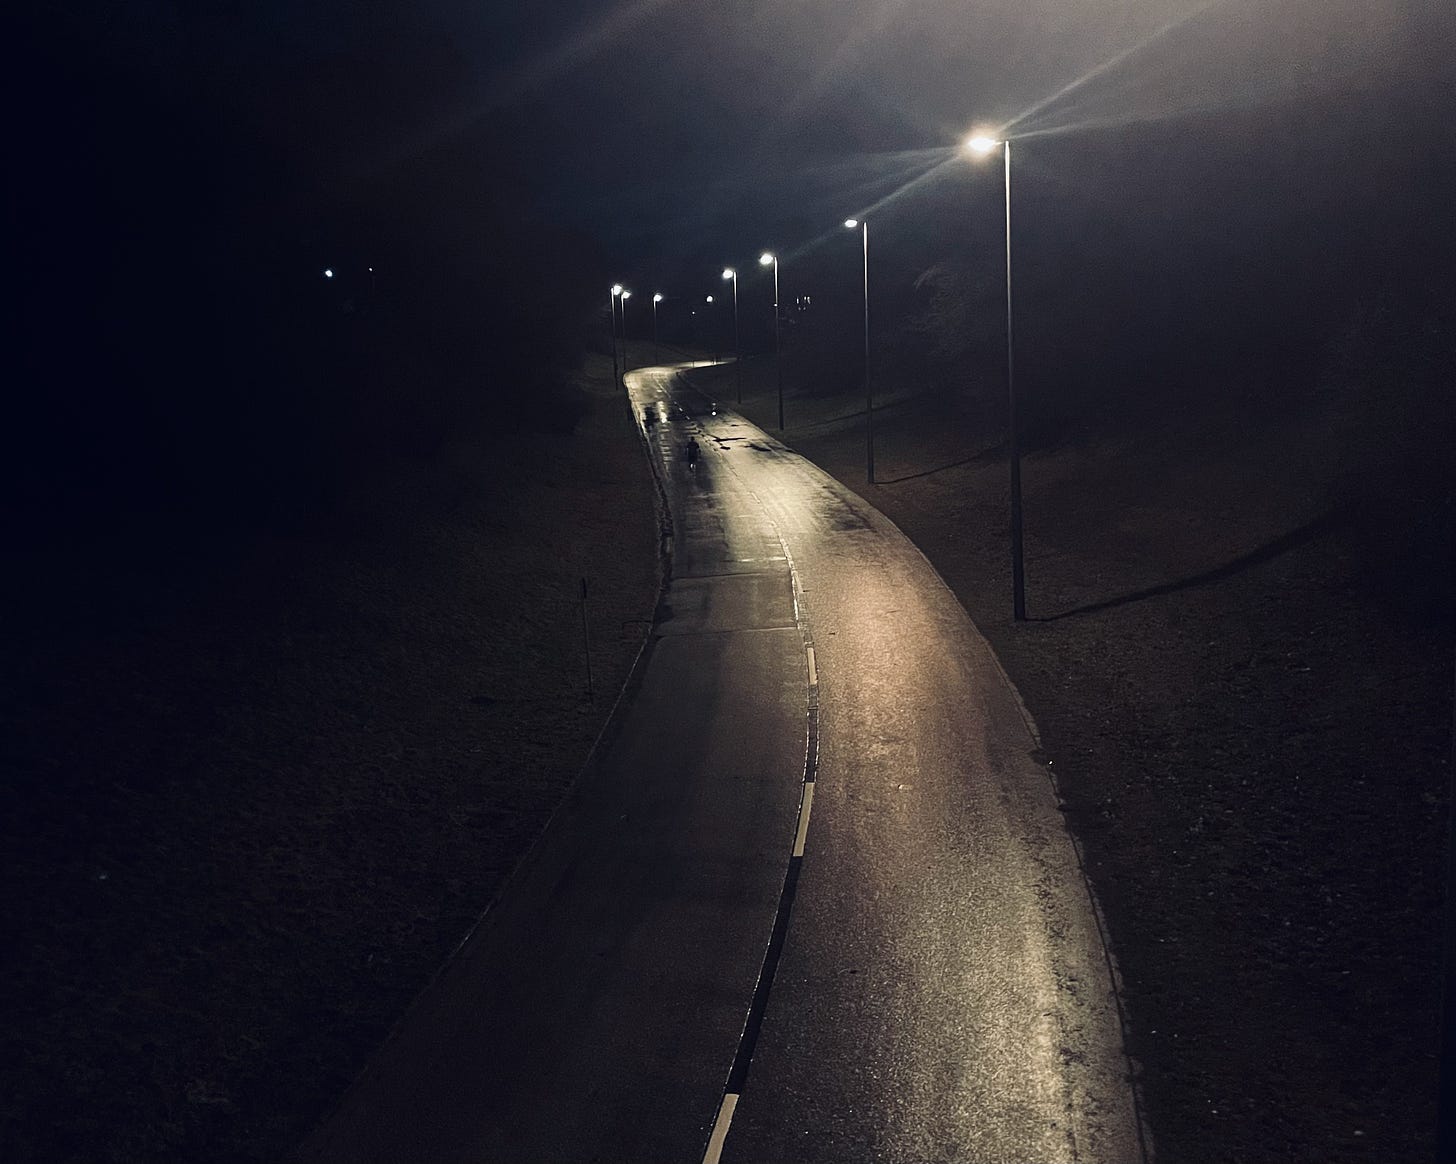 The author running along a road at night